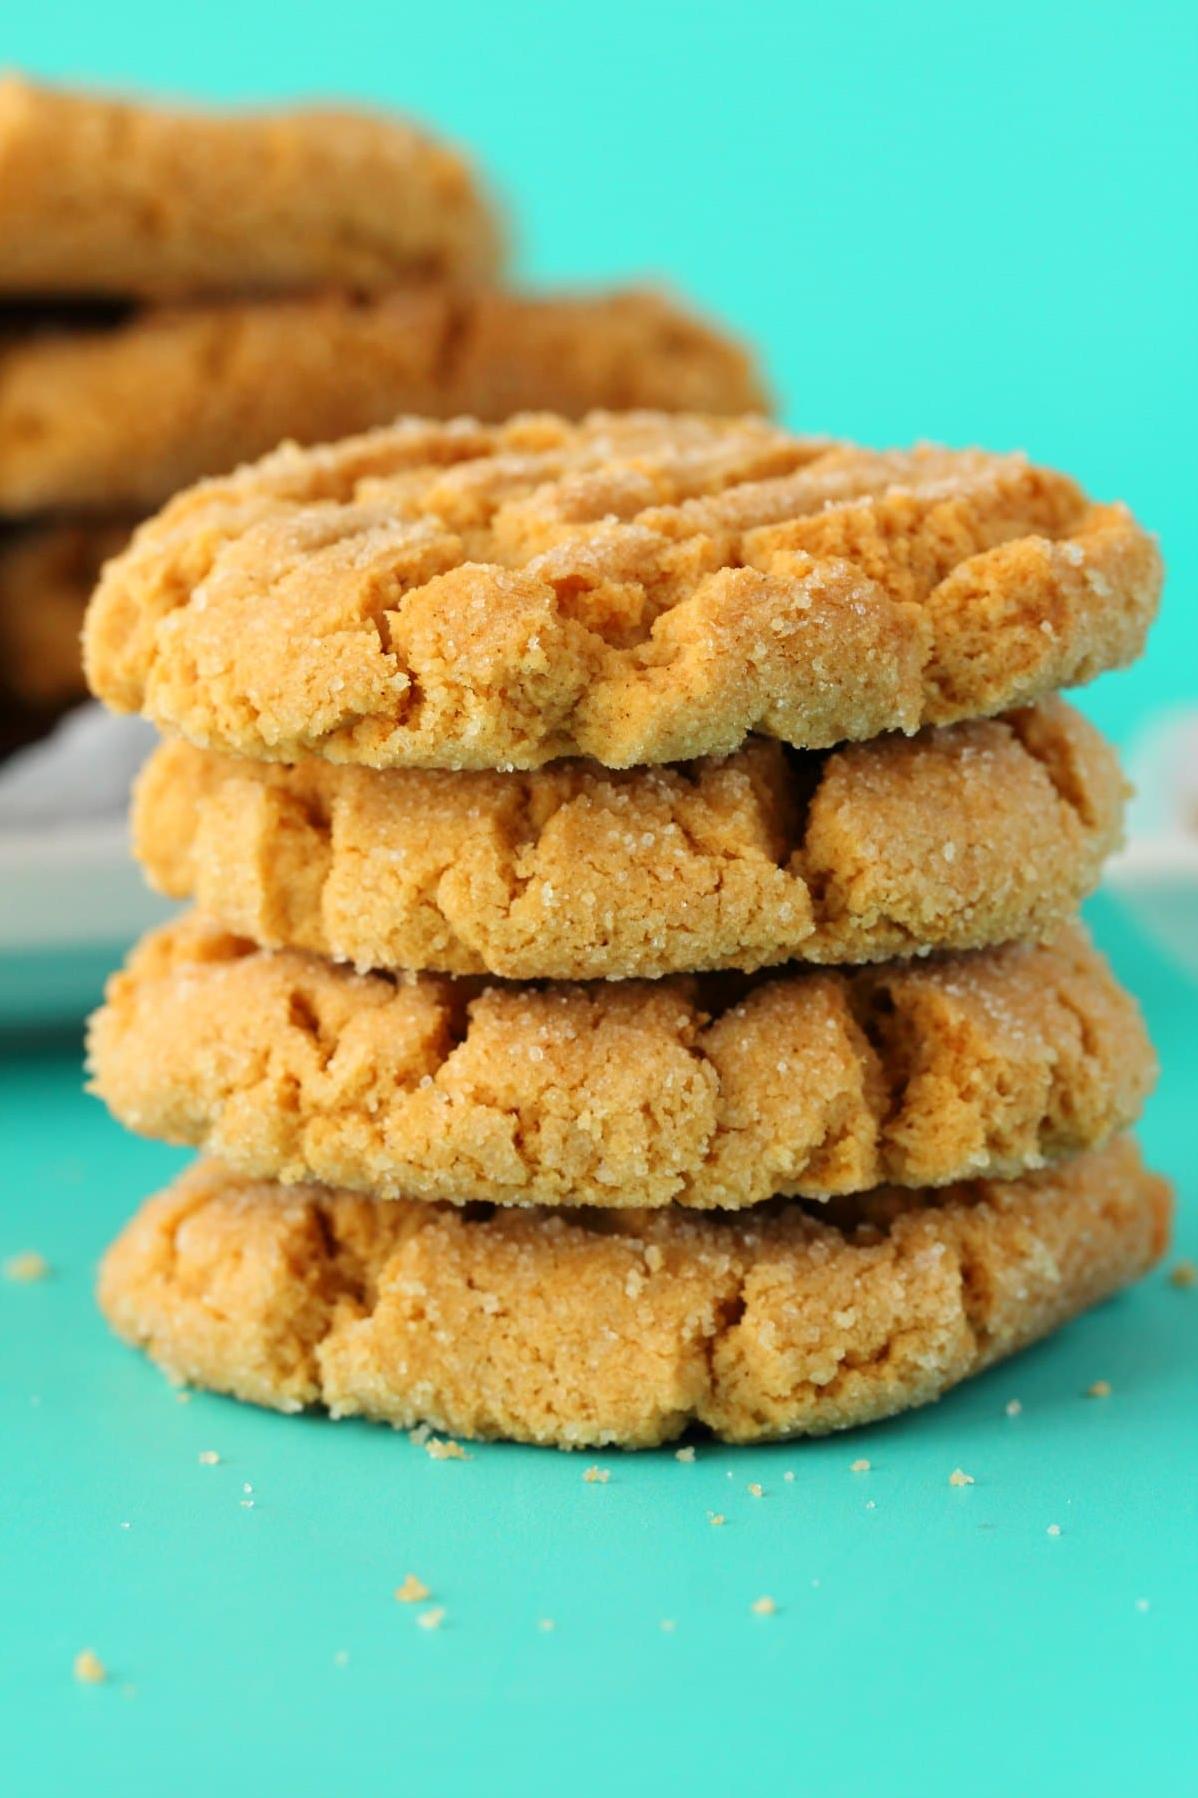  Just one bite and you'll be hooked, craving the nutty, sweet flavors that make this vegan peanut butter cookie recipe so special.